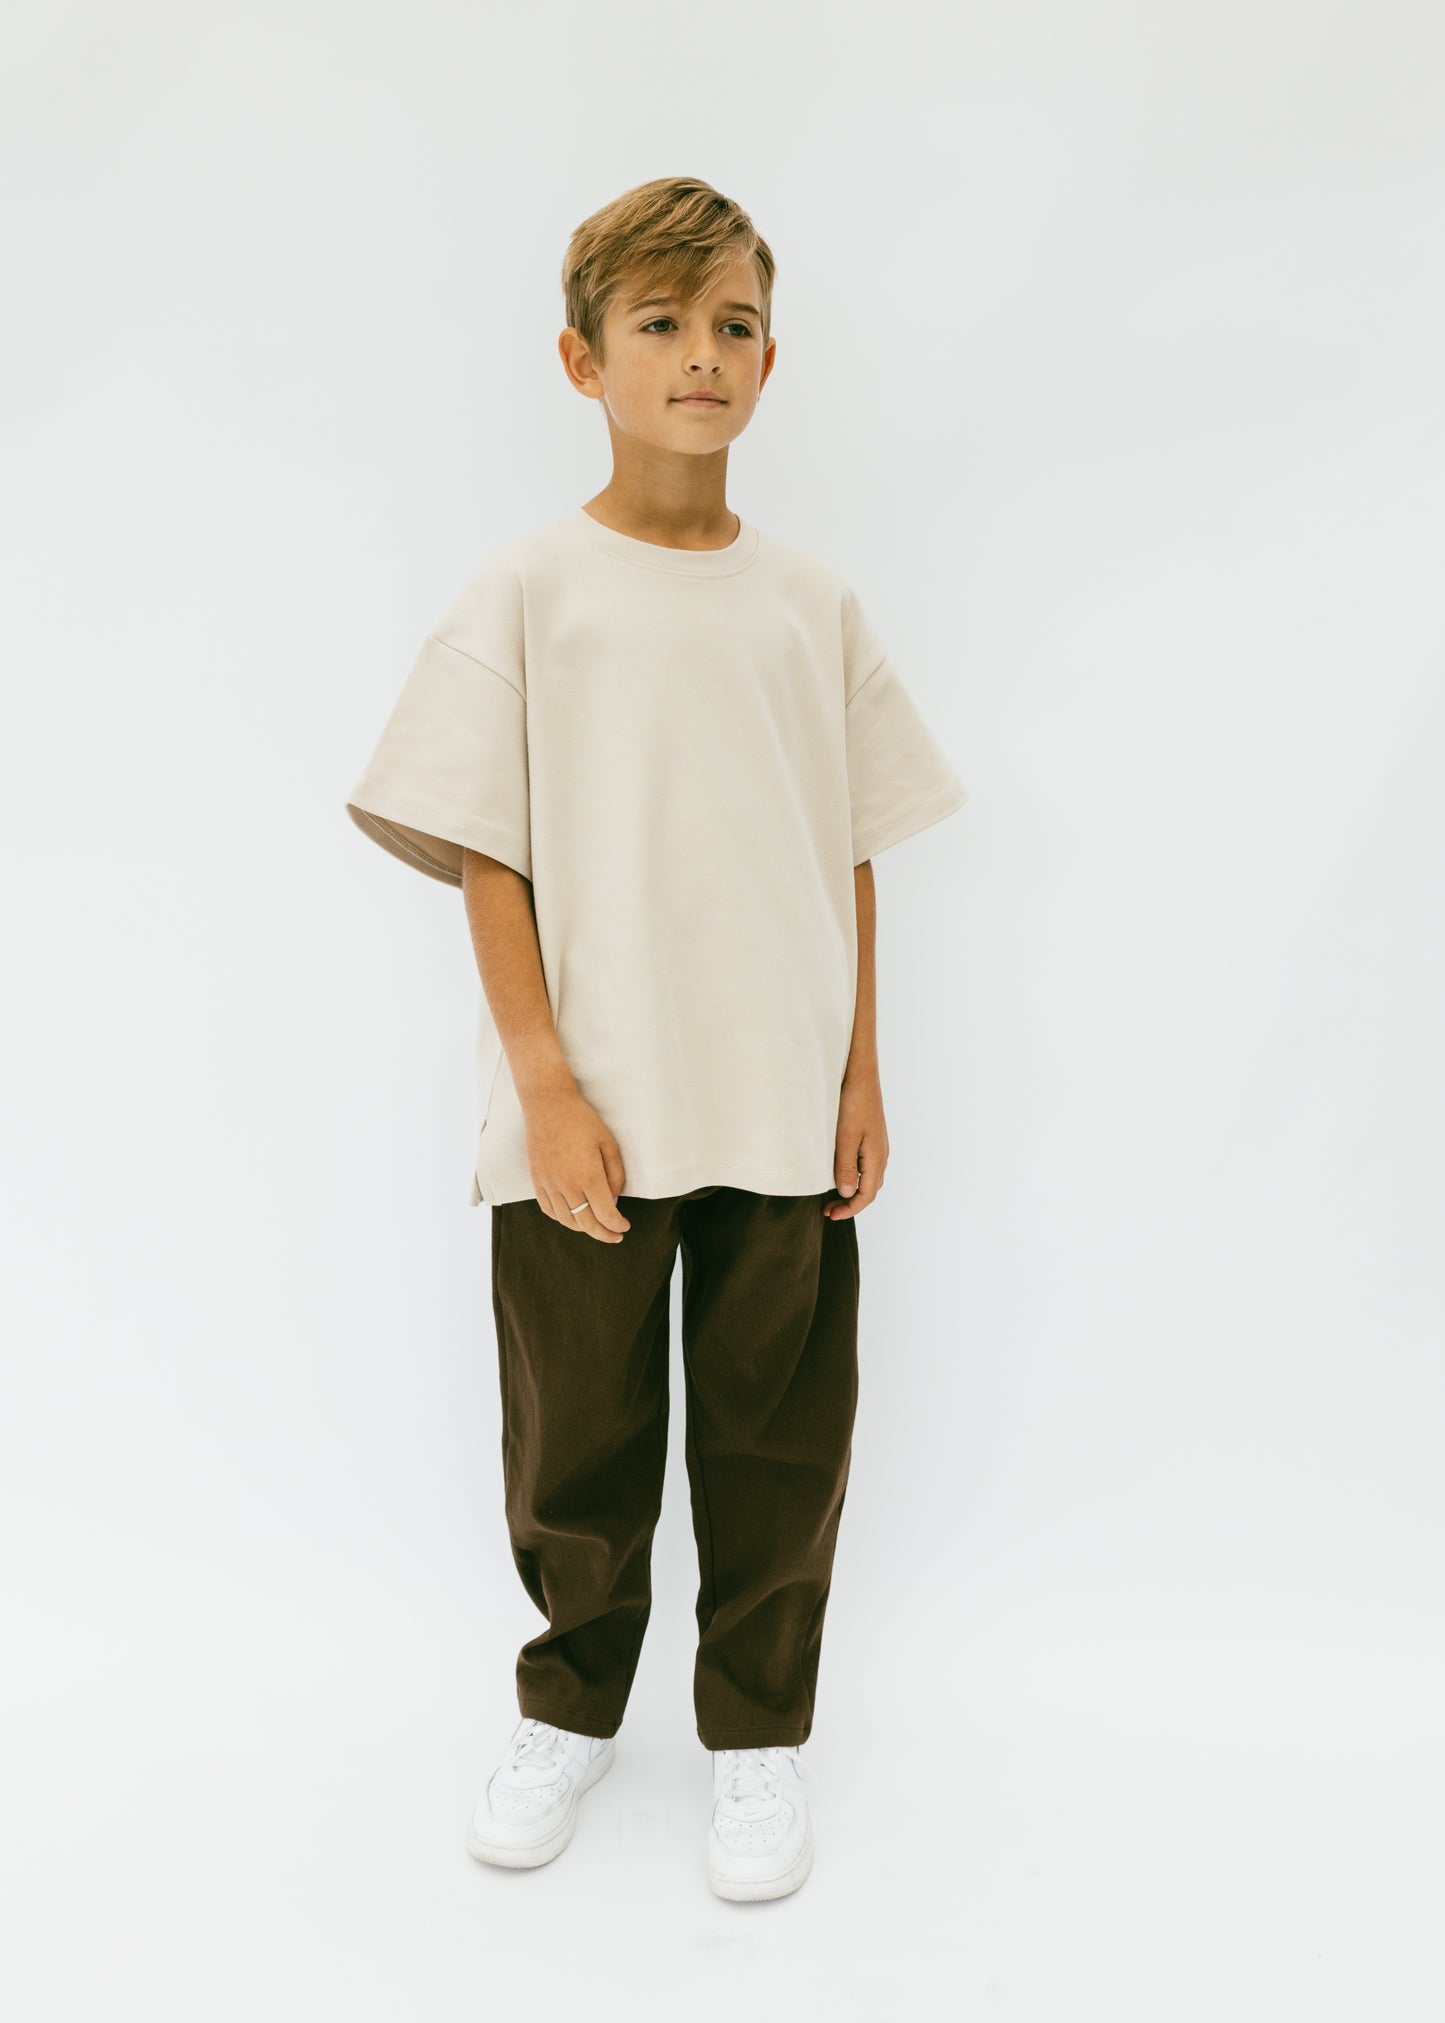  Fostered Collection Boxy Organic Tee